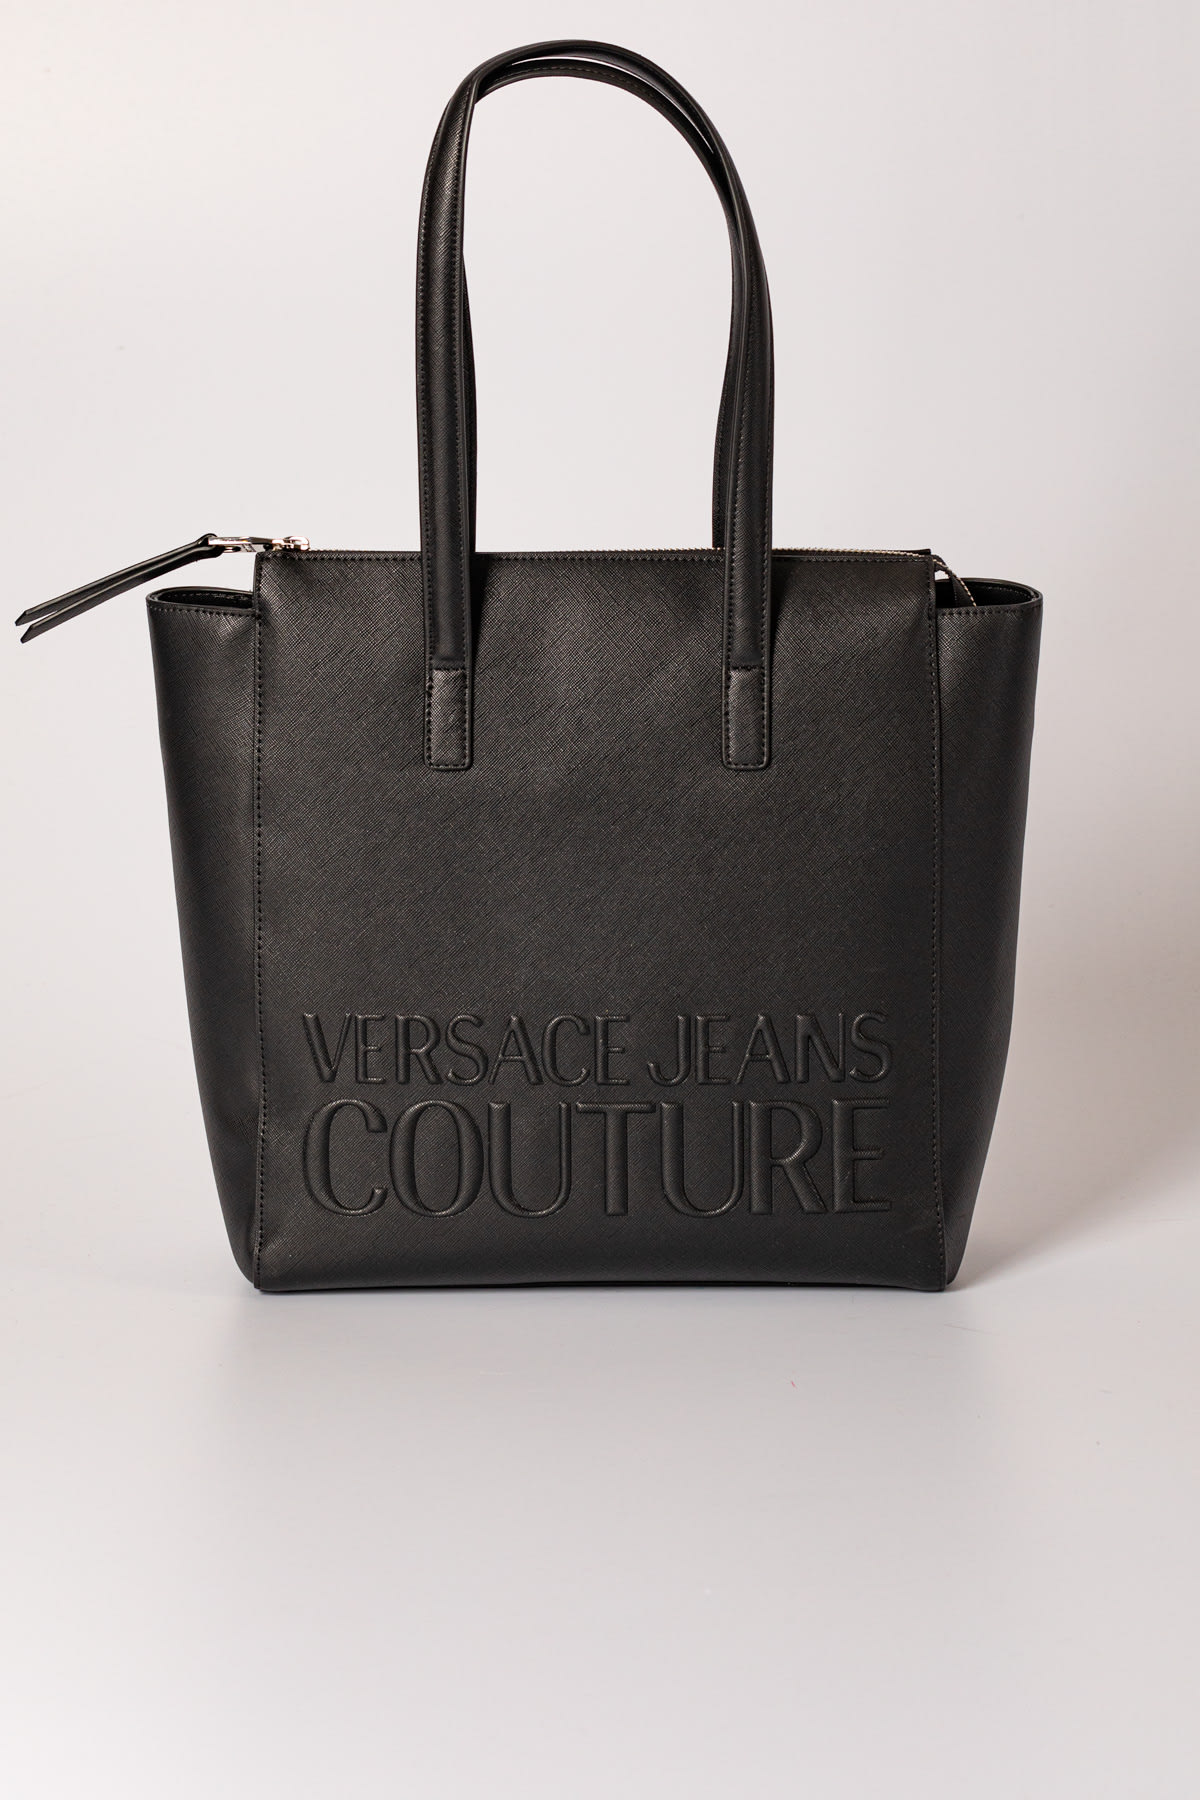 Versace Jeans Couture Shoulder Bag In Nero